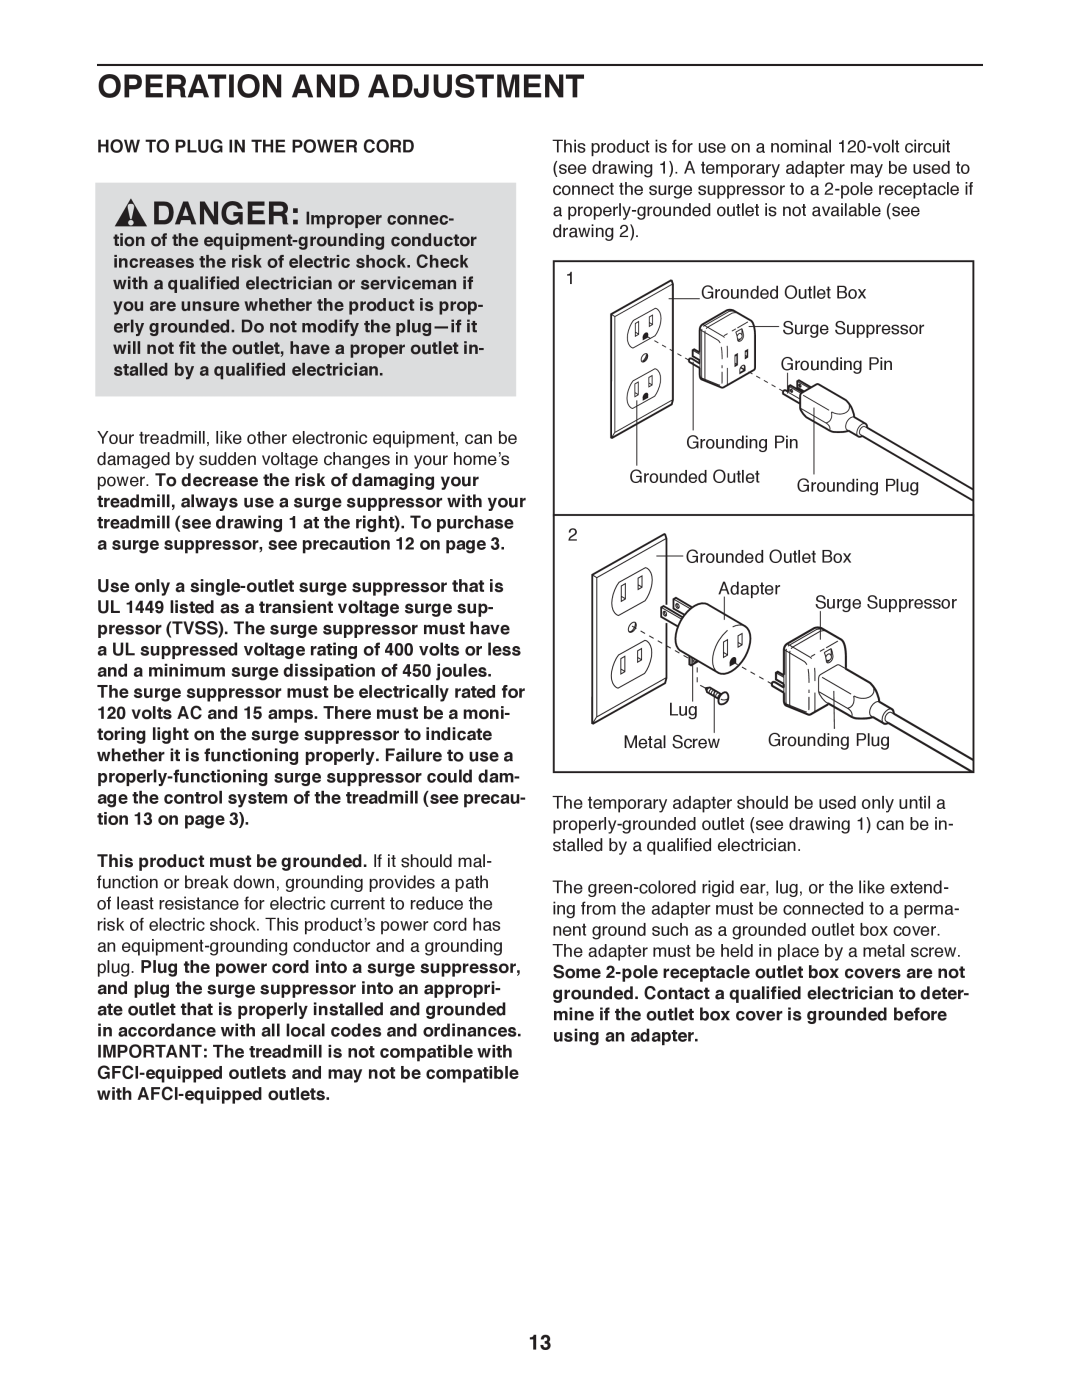 ProForm 397 user manual Operation And Adjustment, How To Plug In The Power Cord 